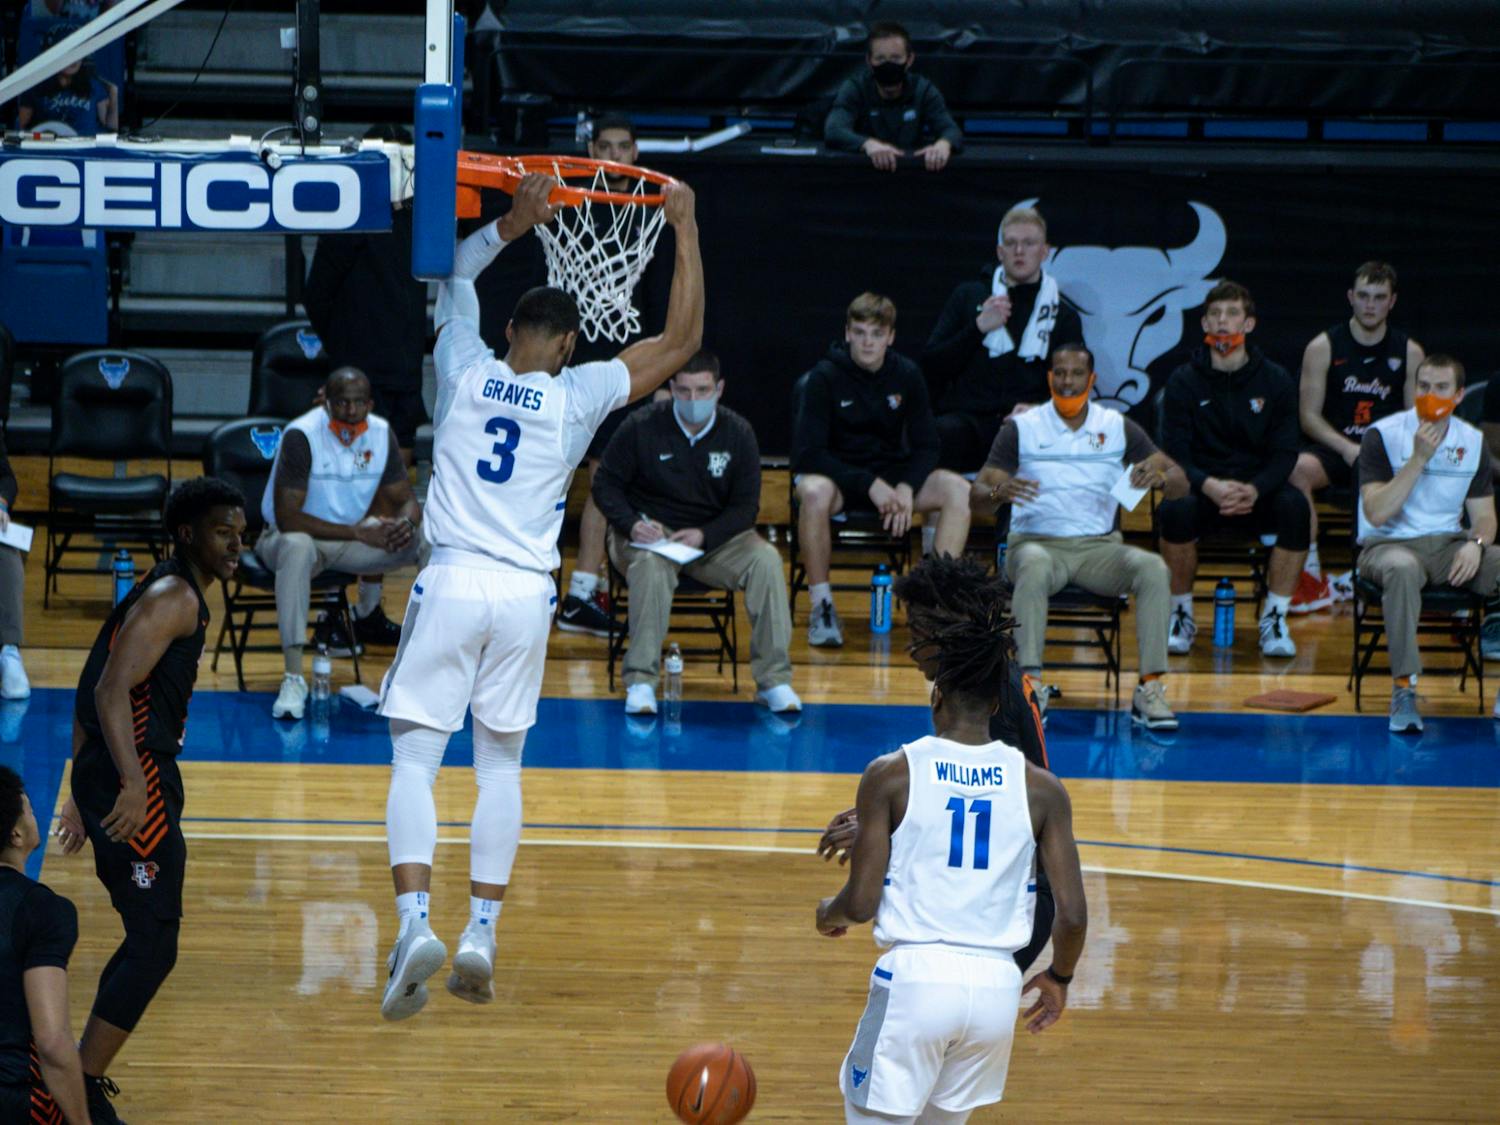 Jayvon Graves hangs onto the rim after a dunk during a game last season.